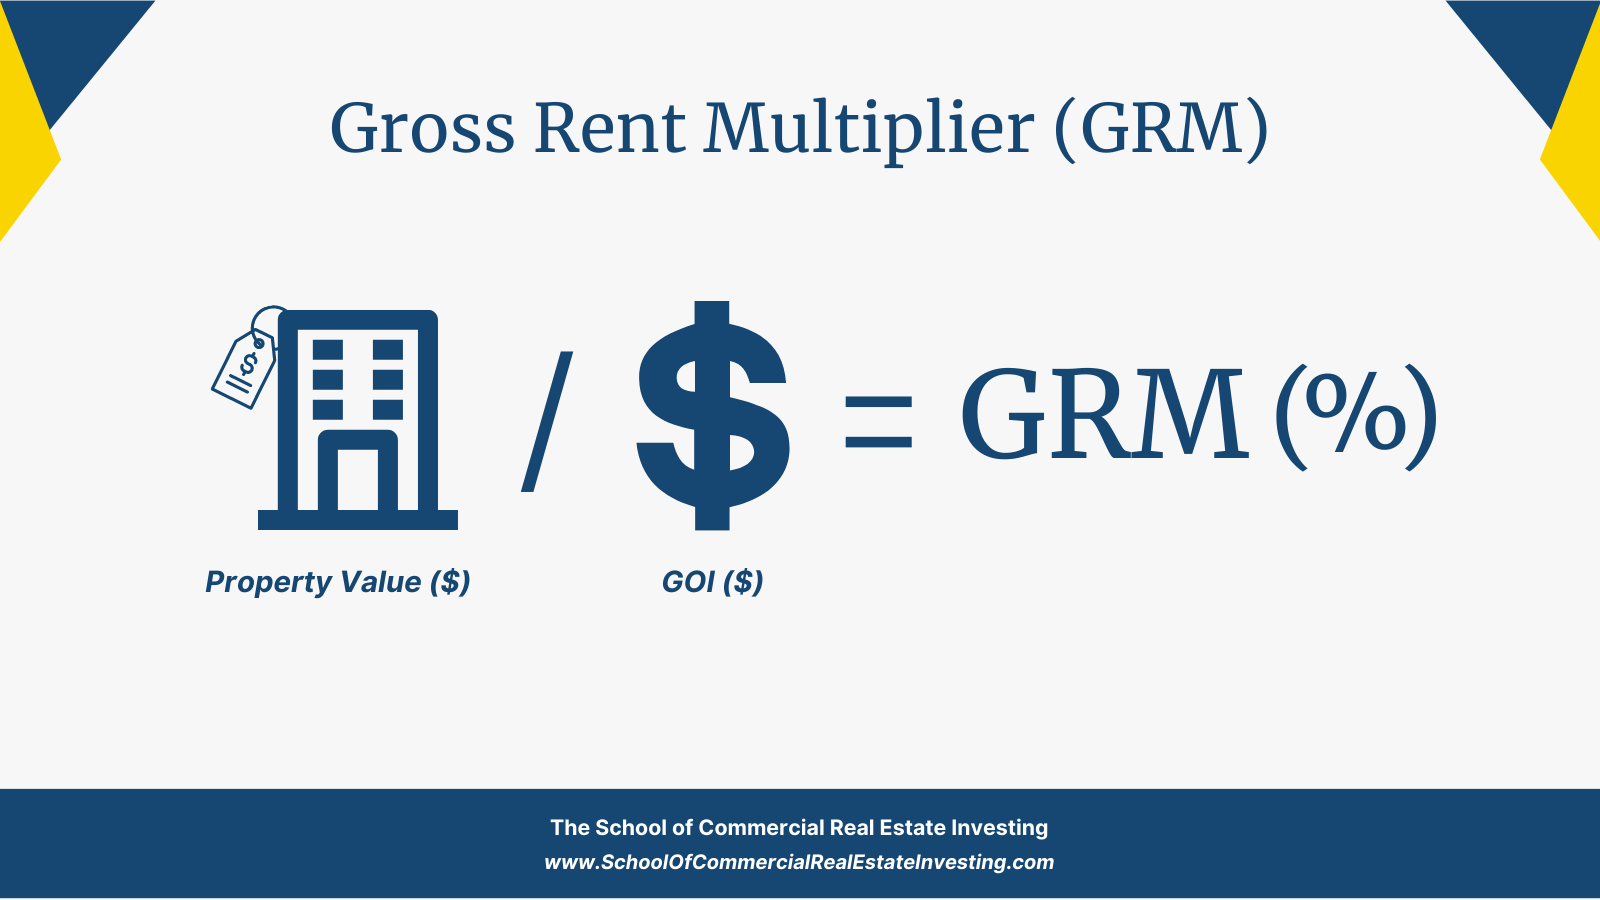 Calculate the Gross Rent Multiplier (GRM) by dividing the Proverty Value by the Gross Operating Income.